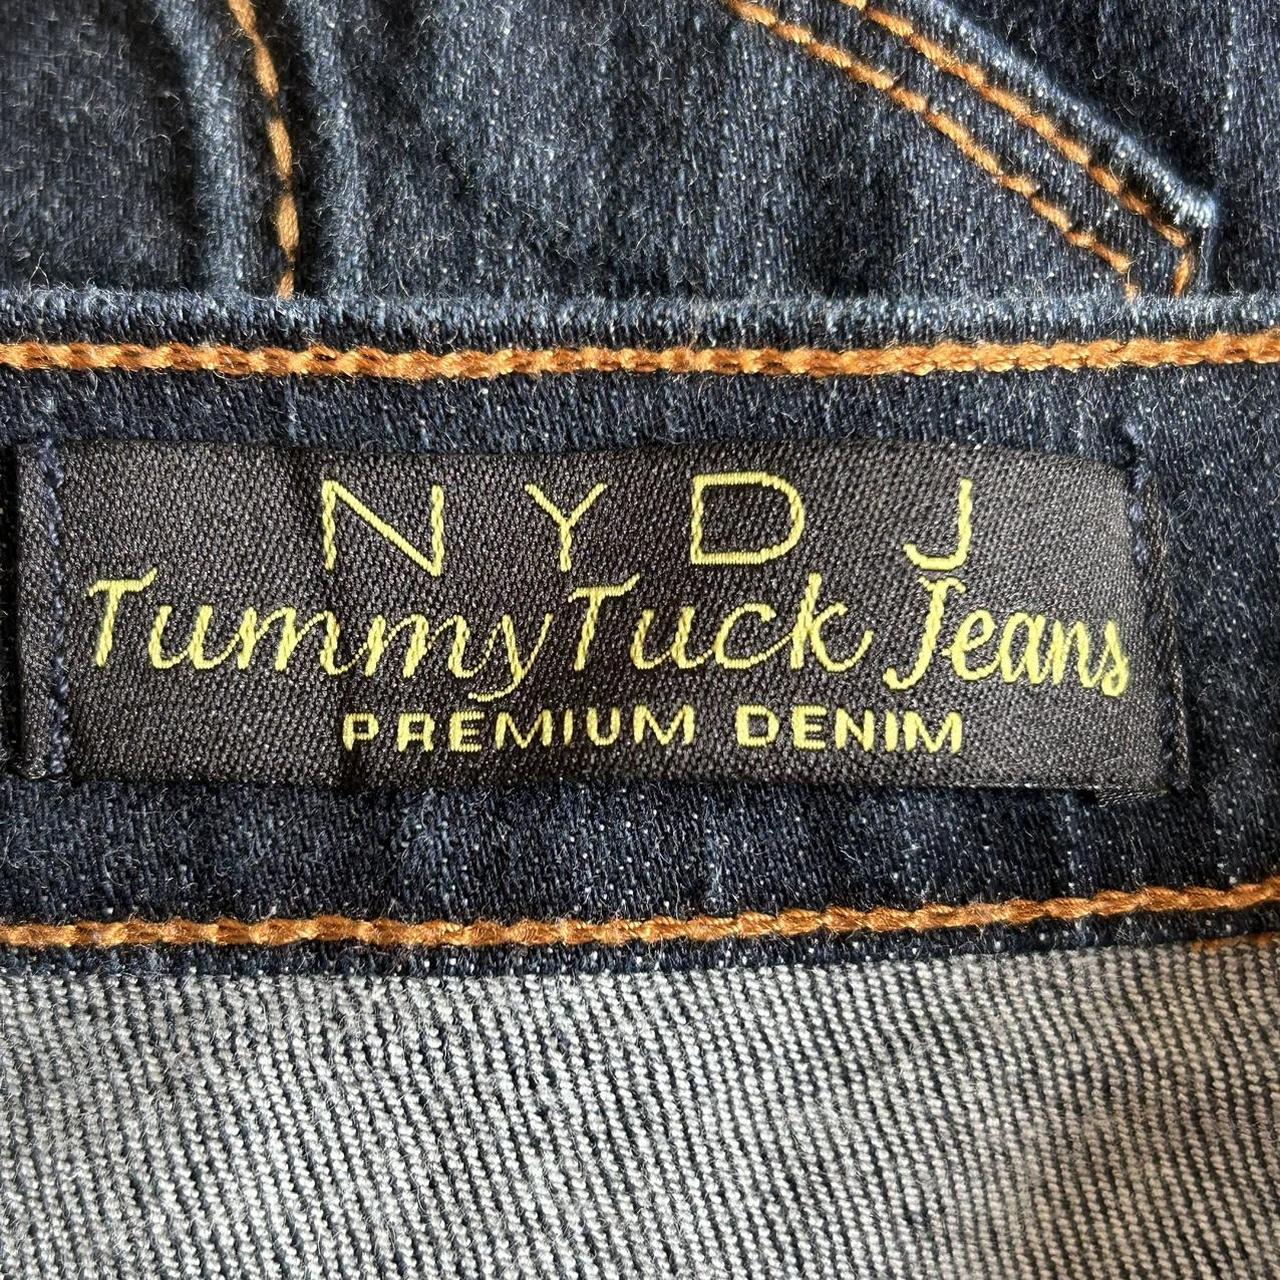 NYDJ Tummy Tuck Jeans Style #735 Size 12, Excellent